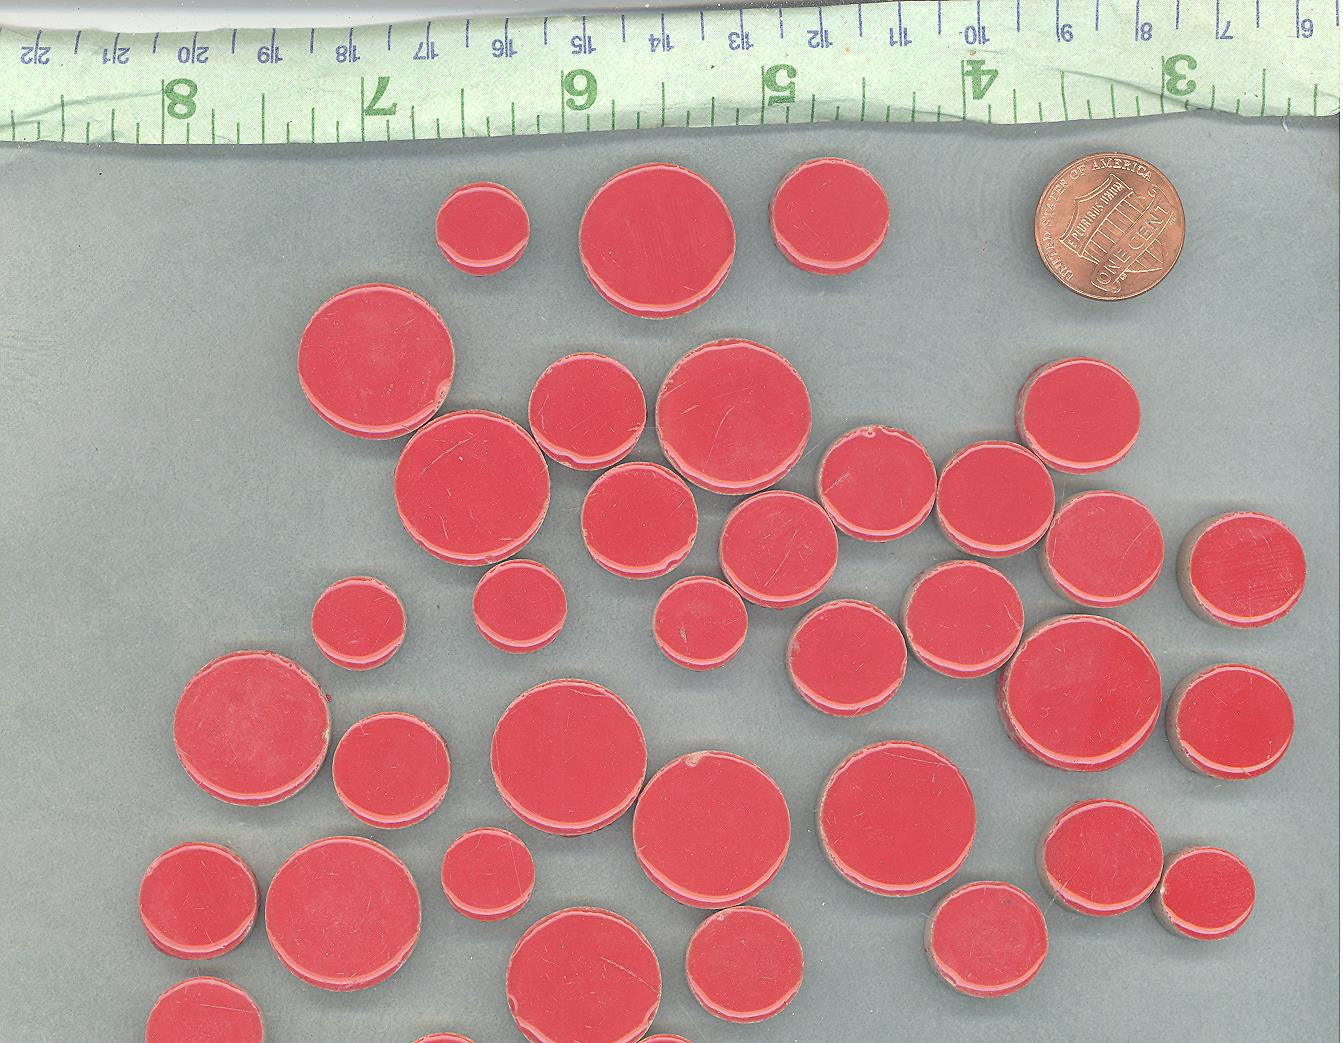 Red Circles Mosaic Tiles - 50g Ceramic in Mix of 3 Sizes 1/2" and 3/4" and 5/8"